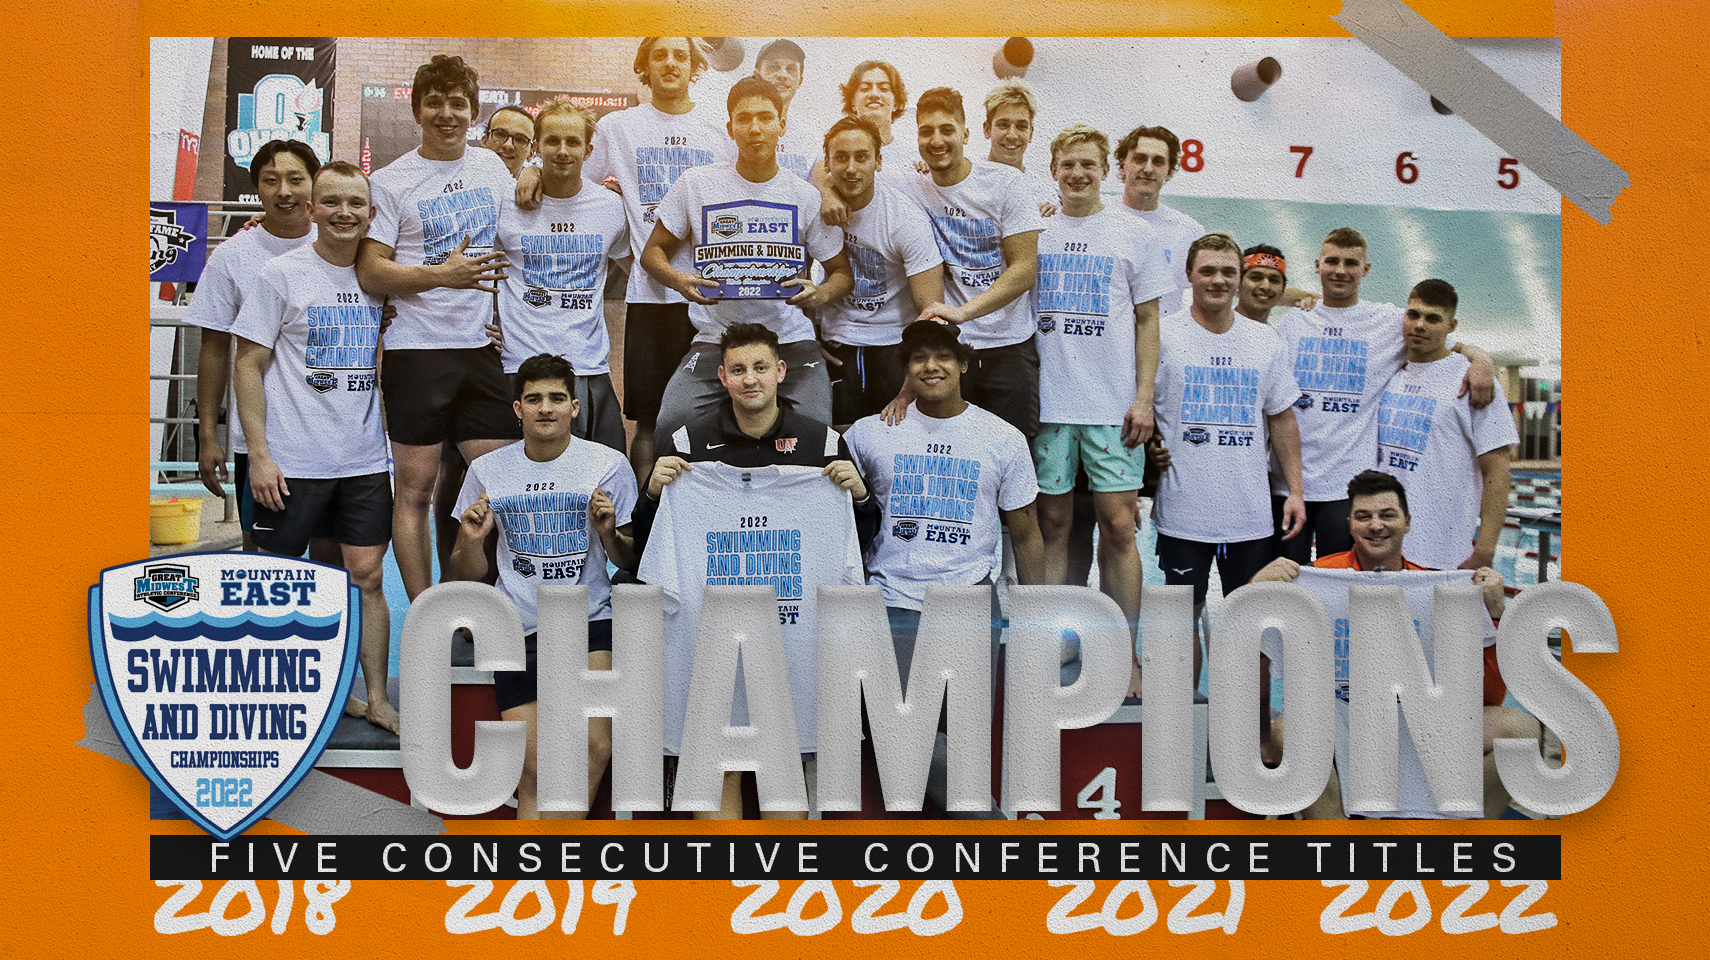 Oilers Men Dominate, Win Fifth Consecutive Conference Crown | Women Finish Runner-Up